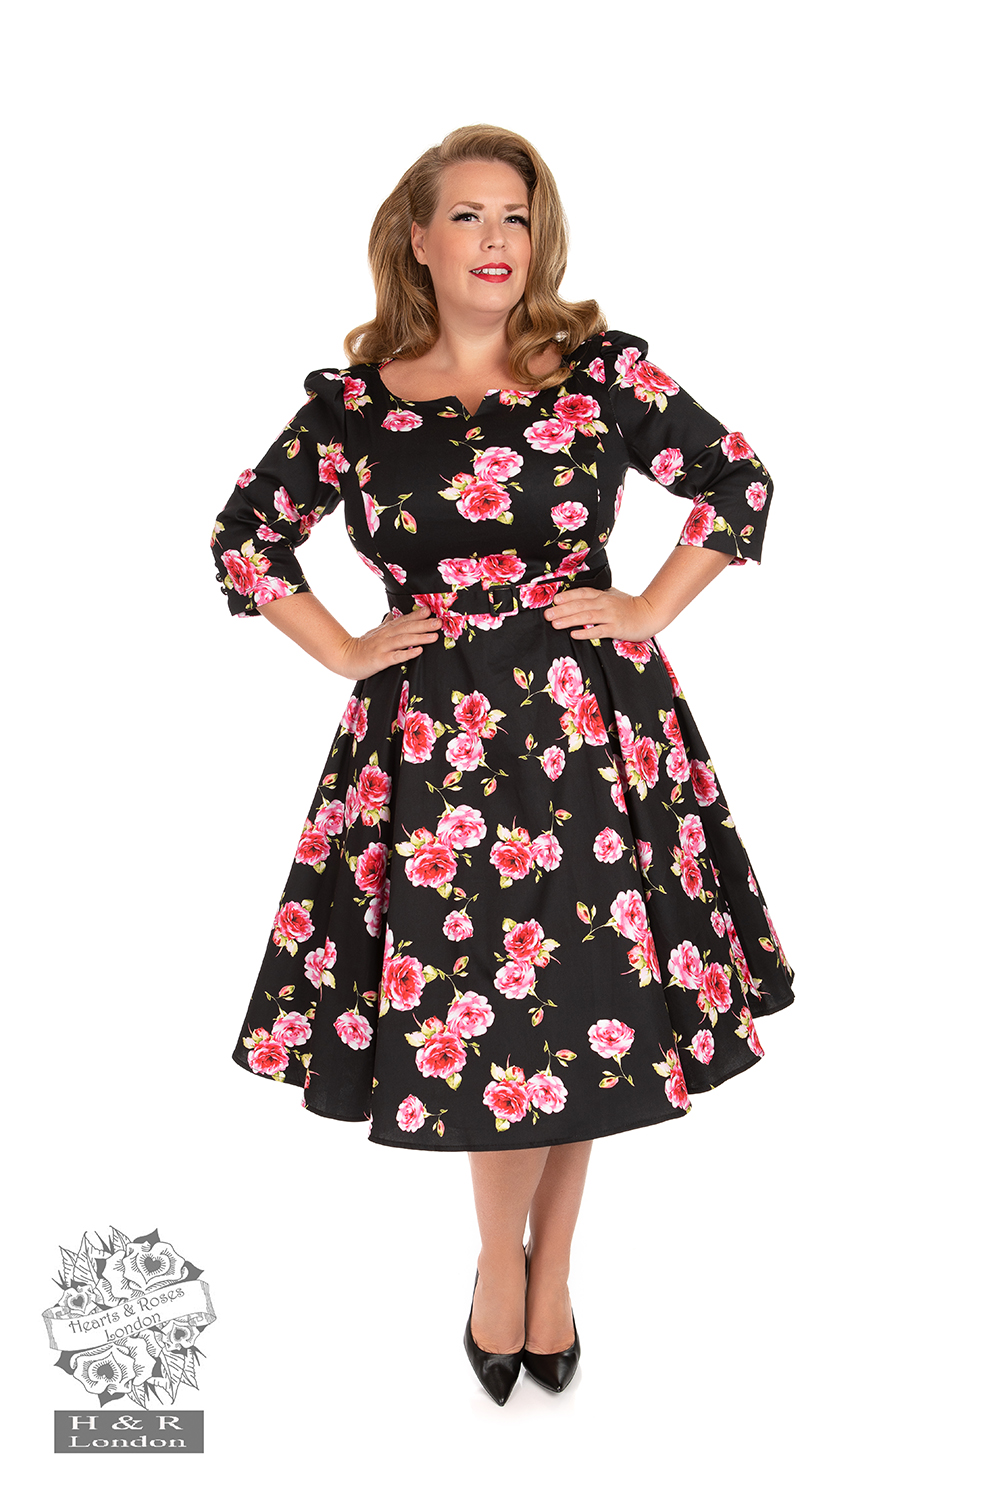 Ava Floral Swing Dress in Plus Size